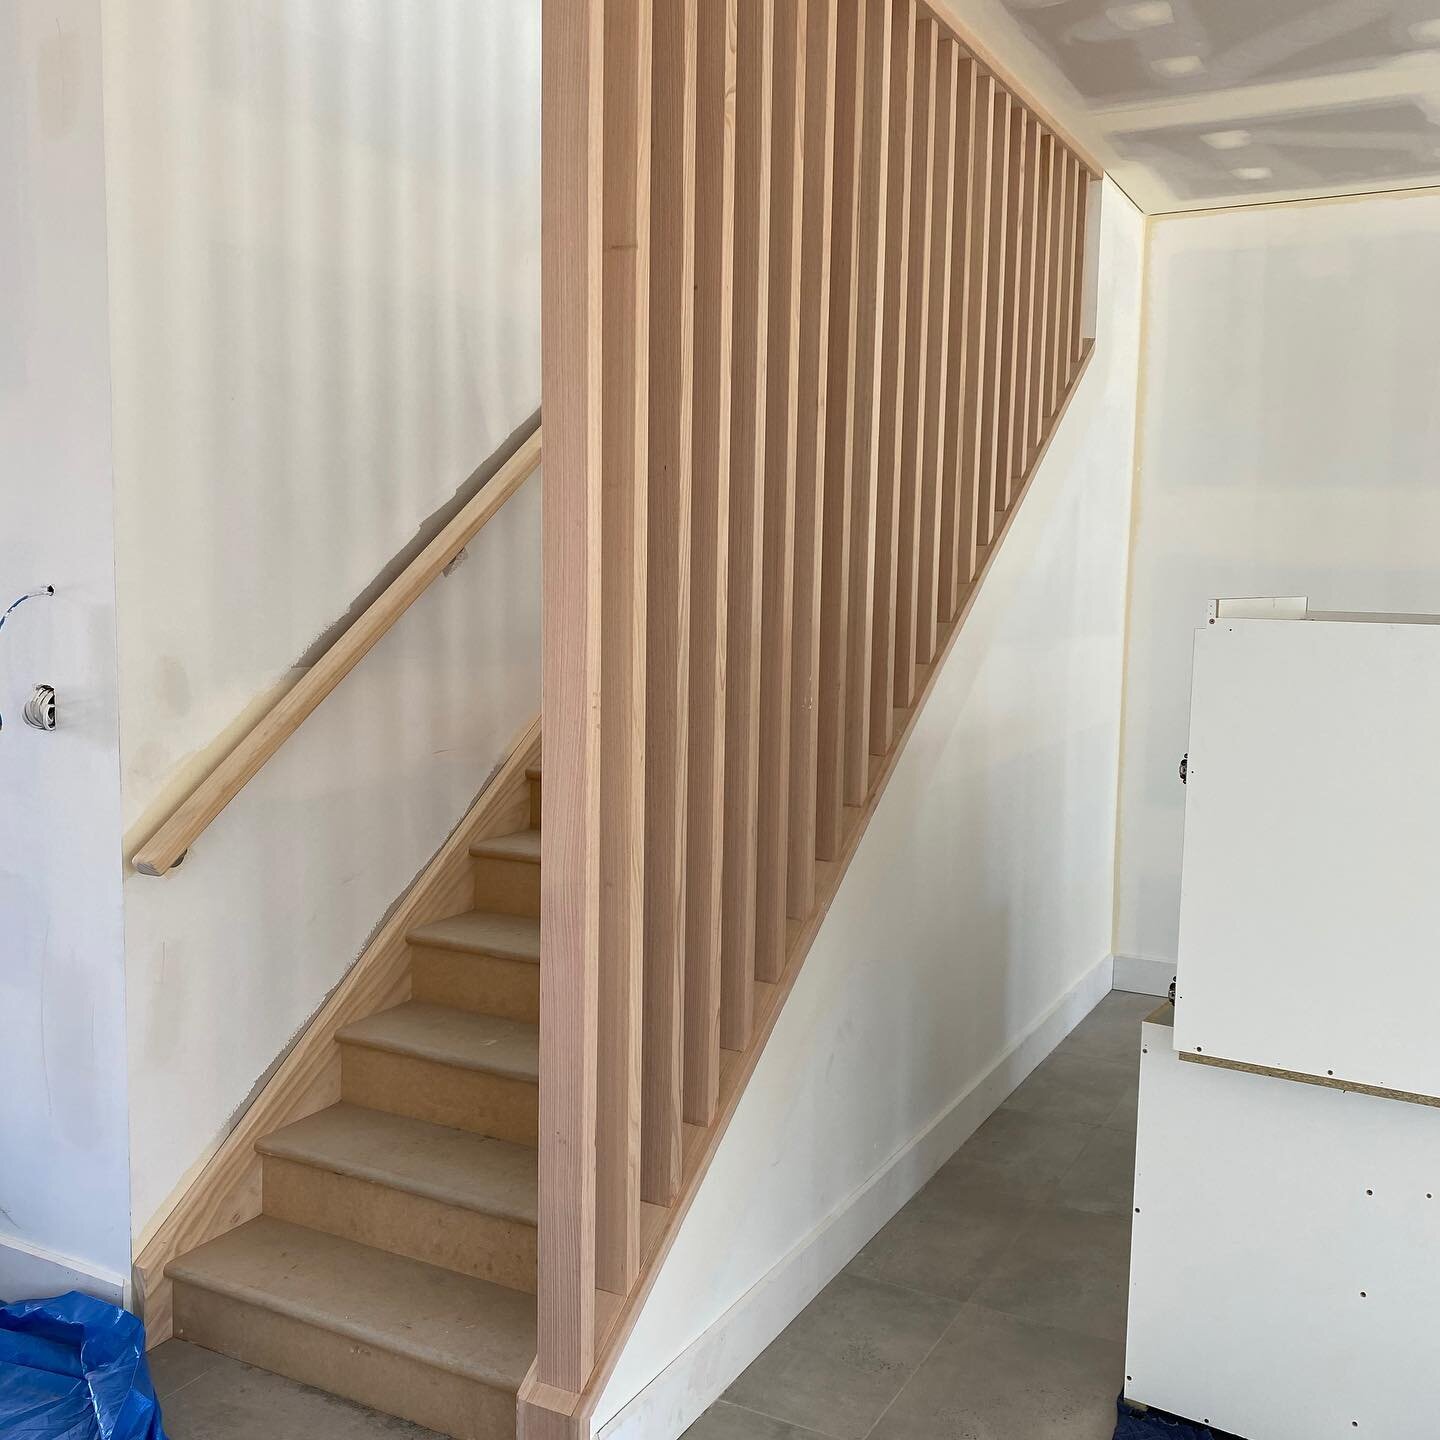 Tasmanian Oak stairwell feature wall. 
#stairs #stairwell #featurewall #tasmanianoak #asona #asonaconstructions #firstbuild #kingscliff #carpentry #carpenter #building #tools #home #contractor #building #custom #construction #design #home #contractor